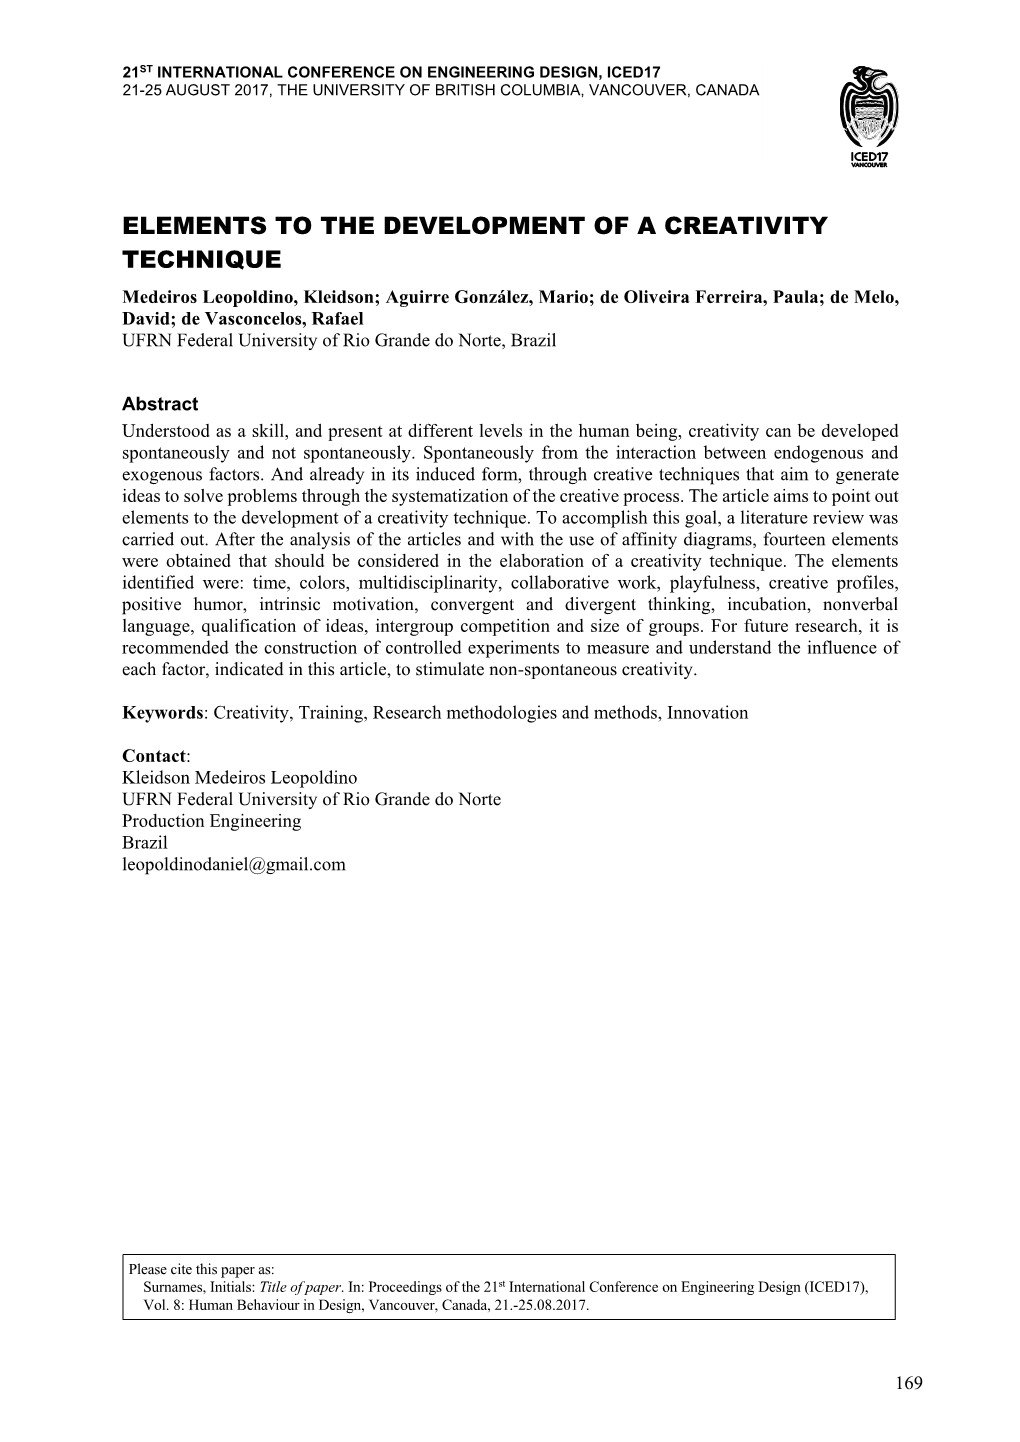 Elements to the Development of a Creativity Technique